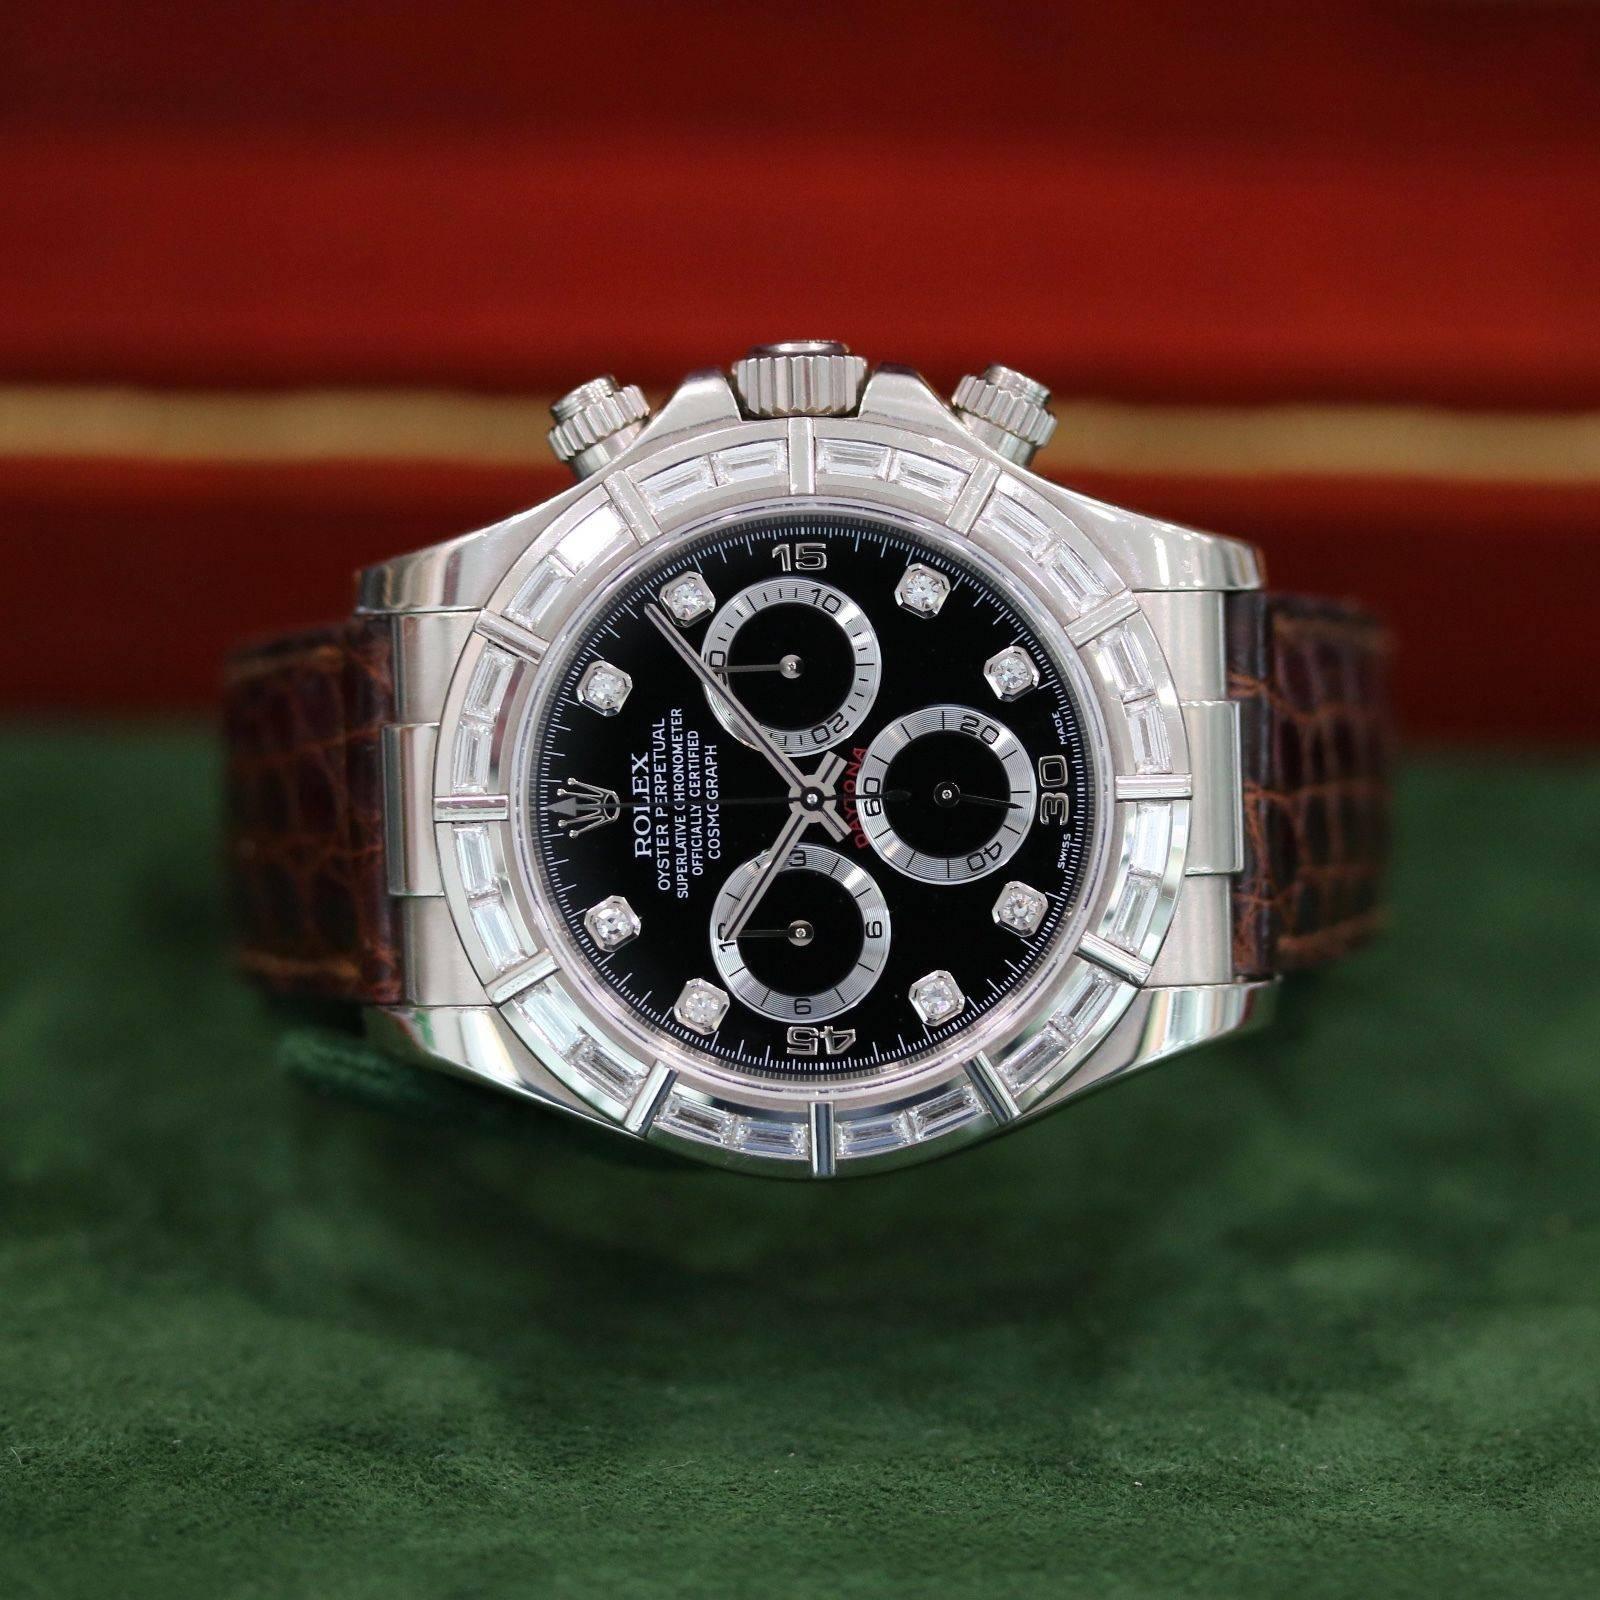 Brand Name: Rolex 
Style Number: 116589
Series: Cosmography Daytona
Gender: Men's
Case Material: 18k White Gold
Dial Color	: Black w/ Diamond Markers
Movement: Automatic
Engine: Cal. 4130
Functions: Hours Minutes, seconds, date,